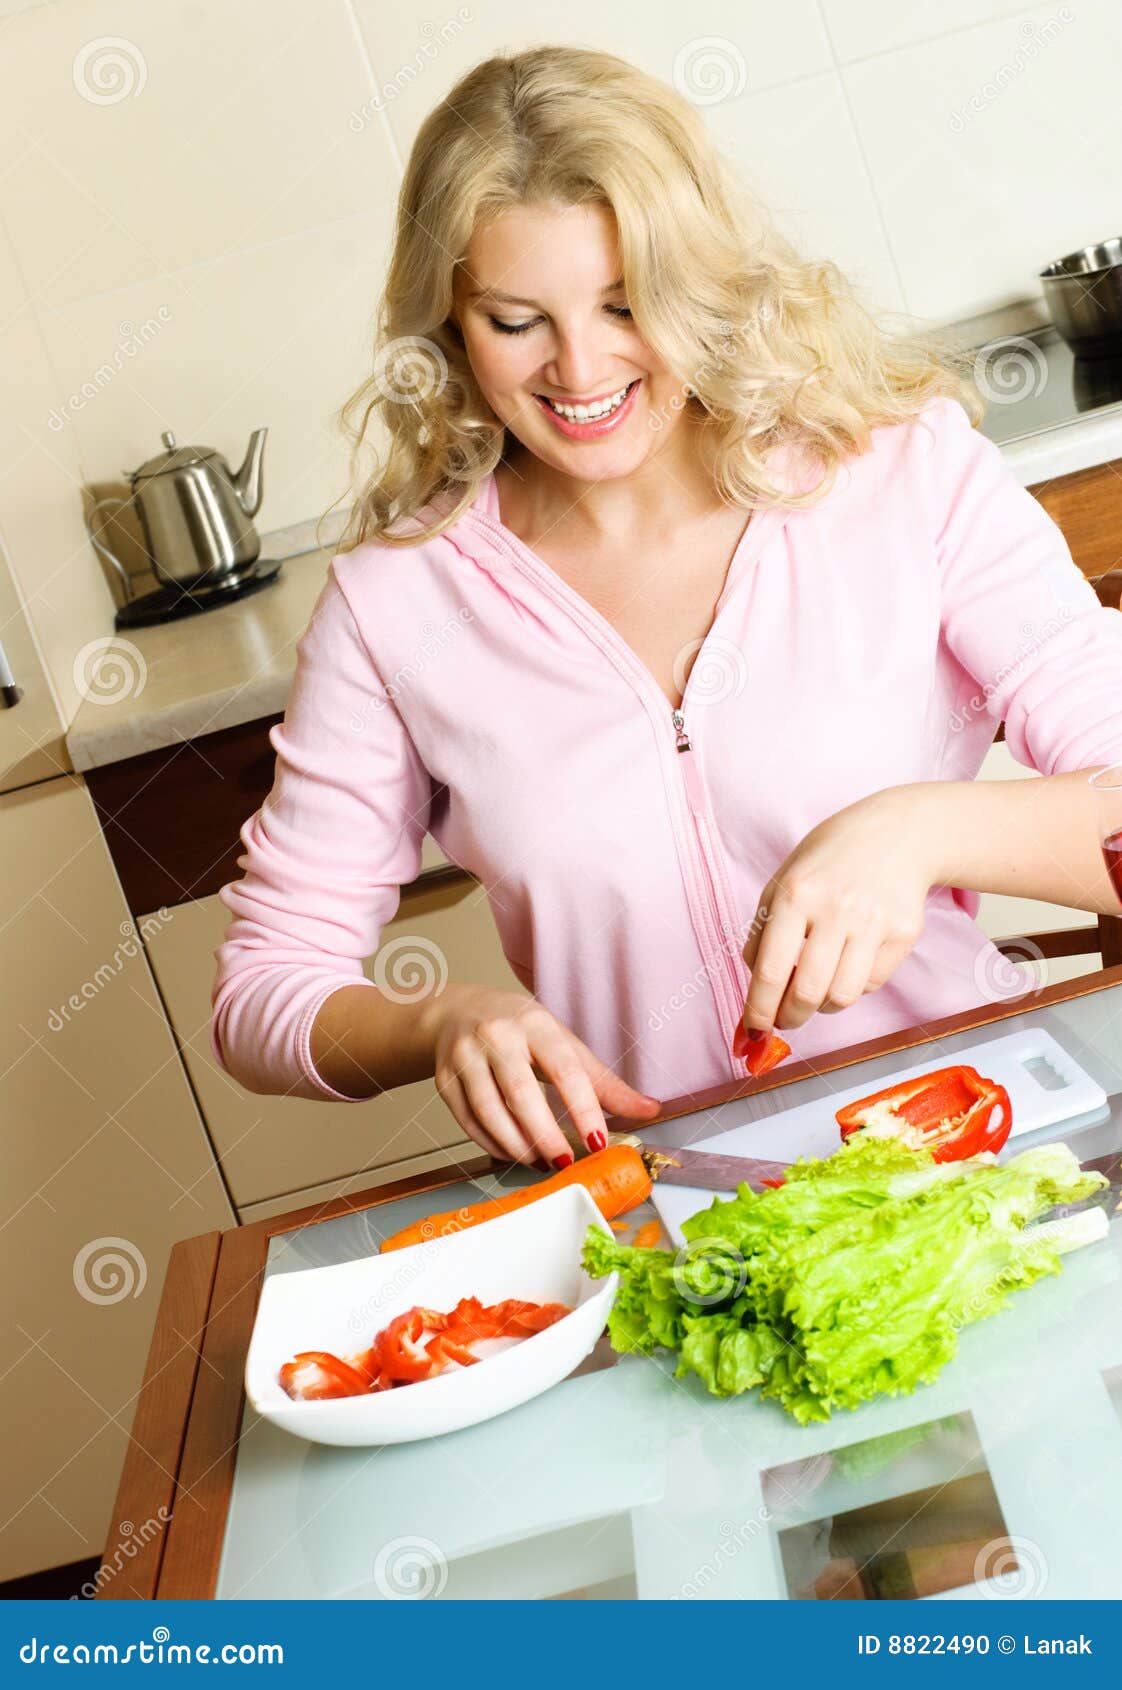 Pretty girl cooking stock photo. Image of caucasian, blond 